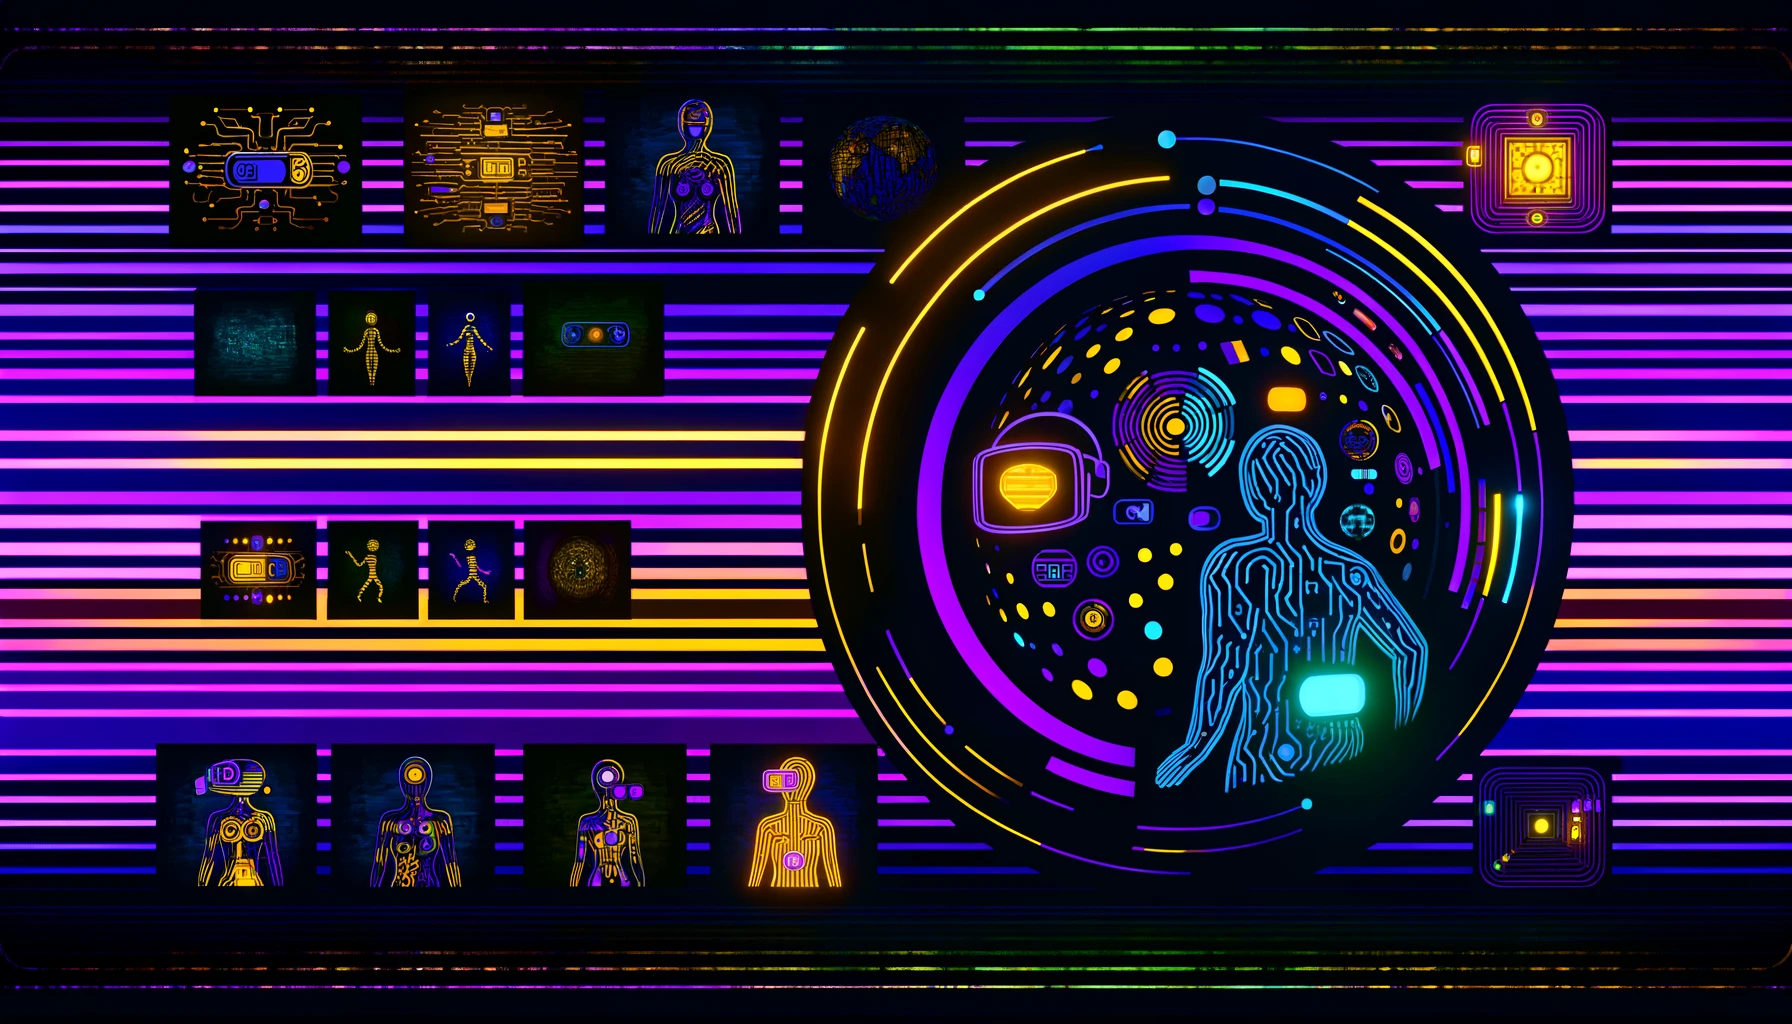 A neon-colored background with a man and a woman in it, challenging stigma.